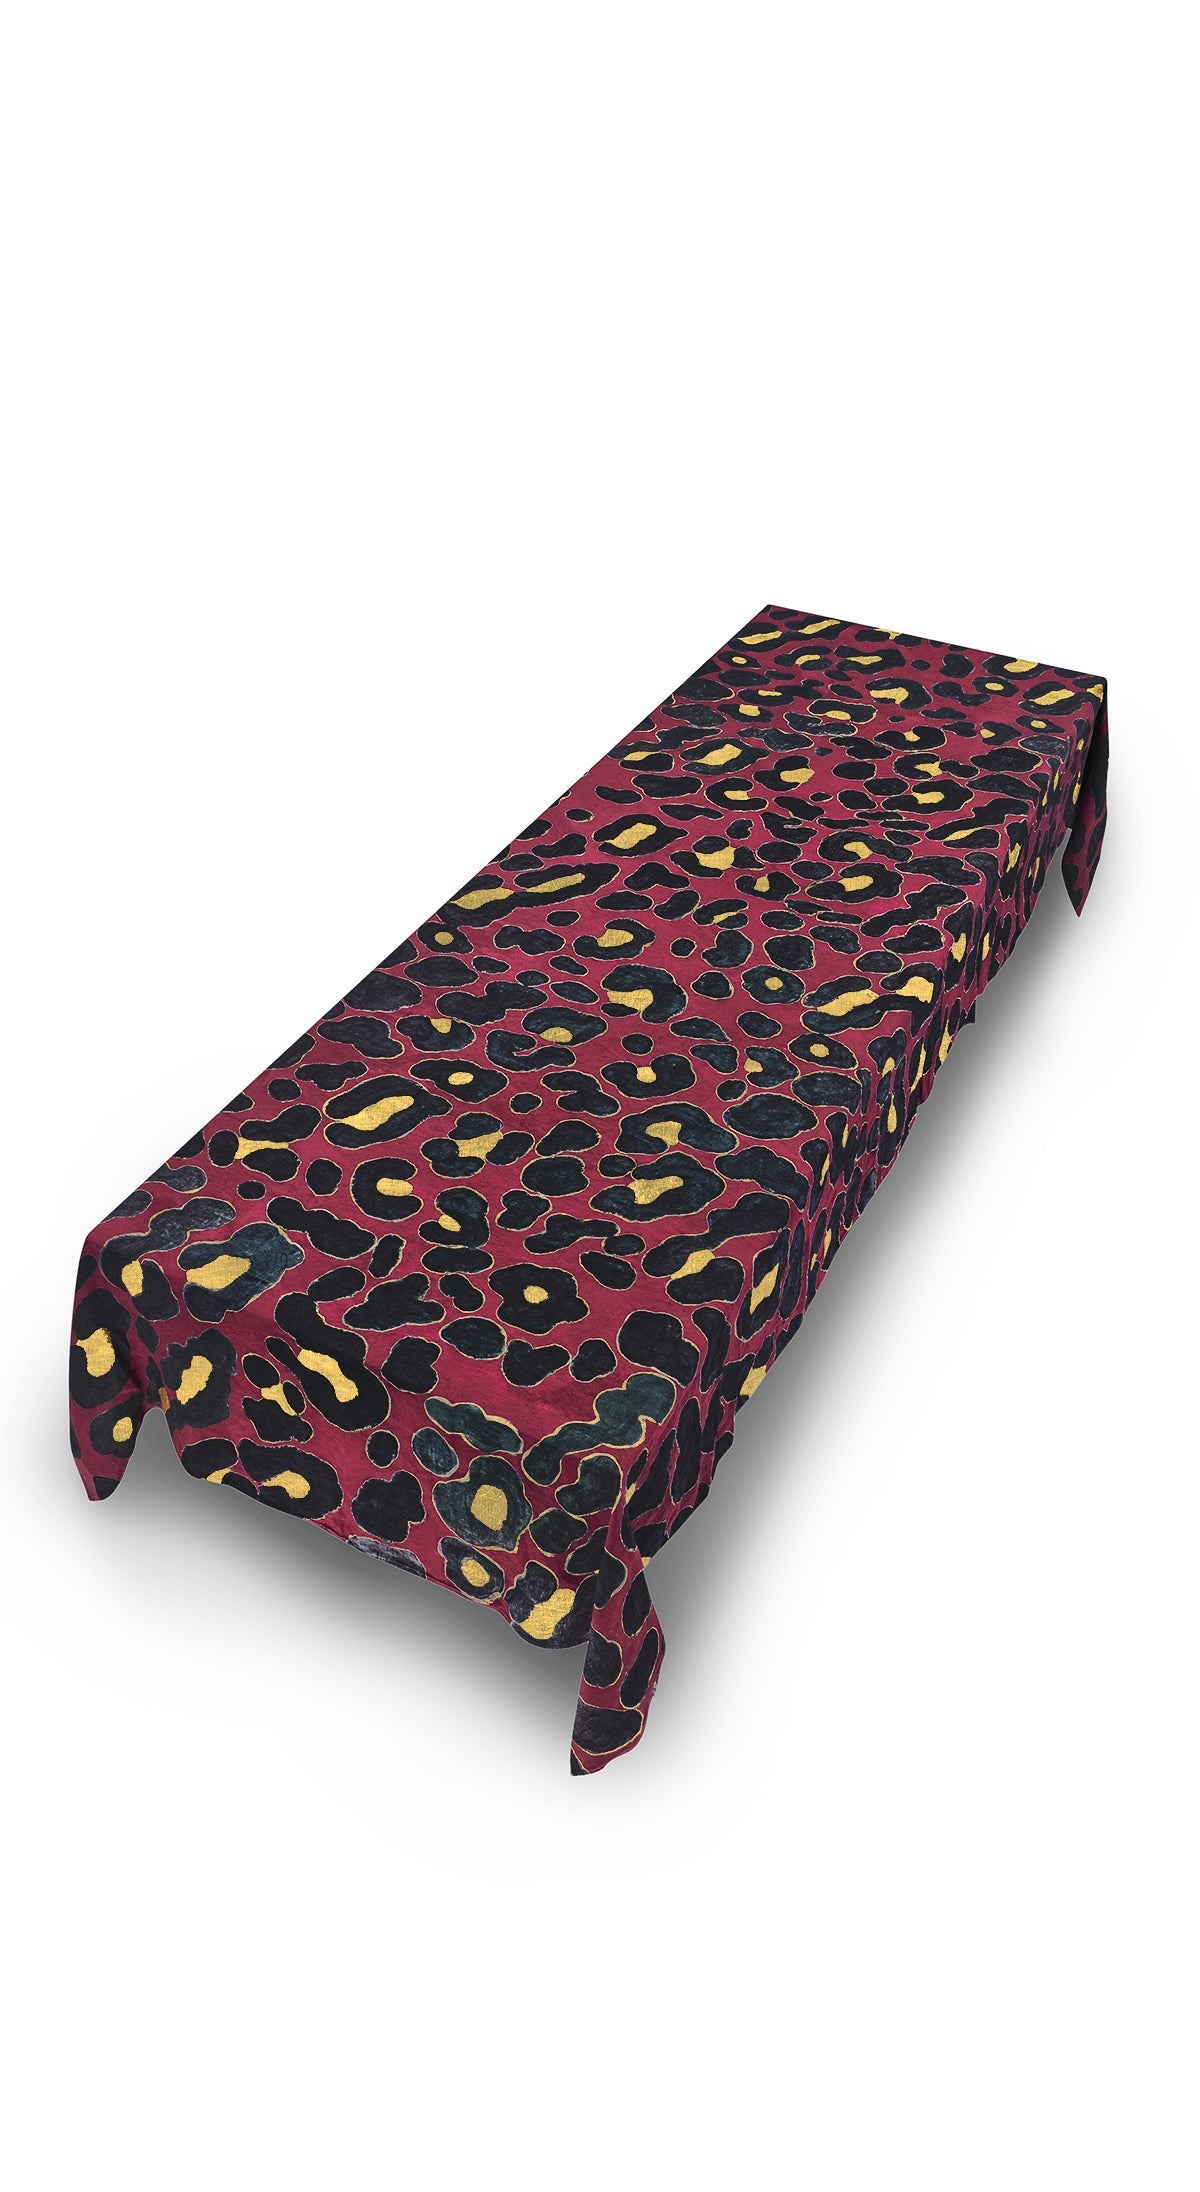 Fierce Leopard Linen Tablecloth in Burgundy with Gold And Smoke Grey Spots